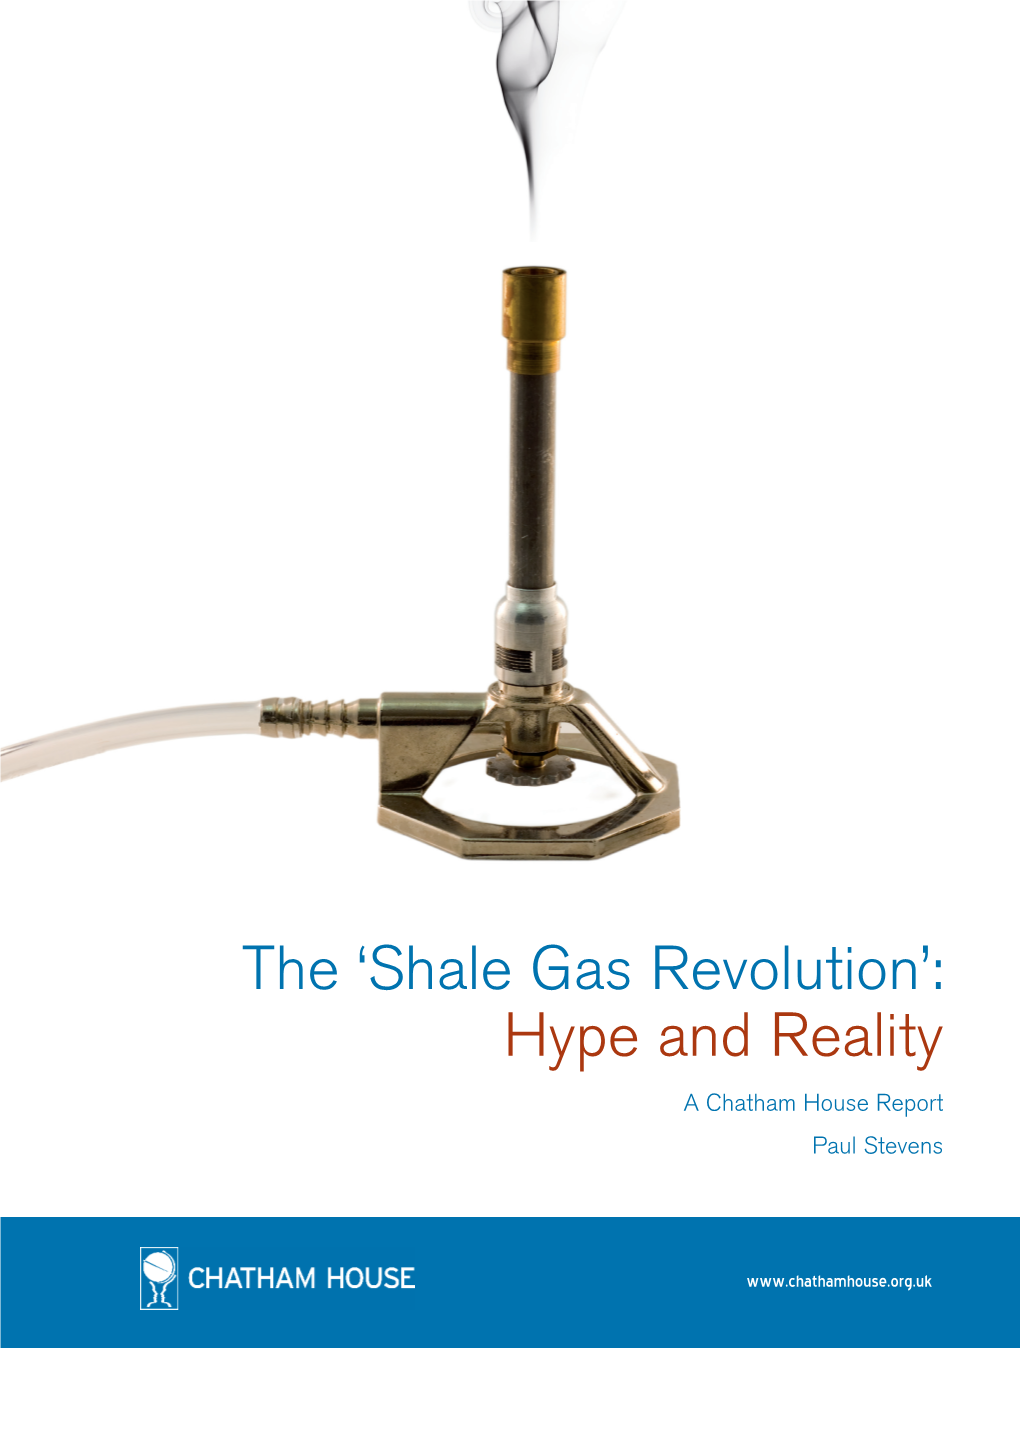 The 'Shale Gas Revolution': Hype and Reality